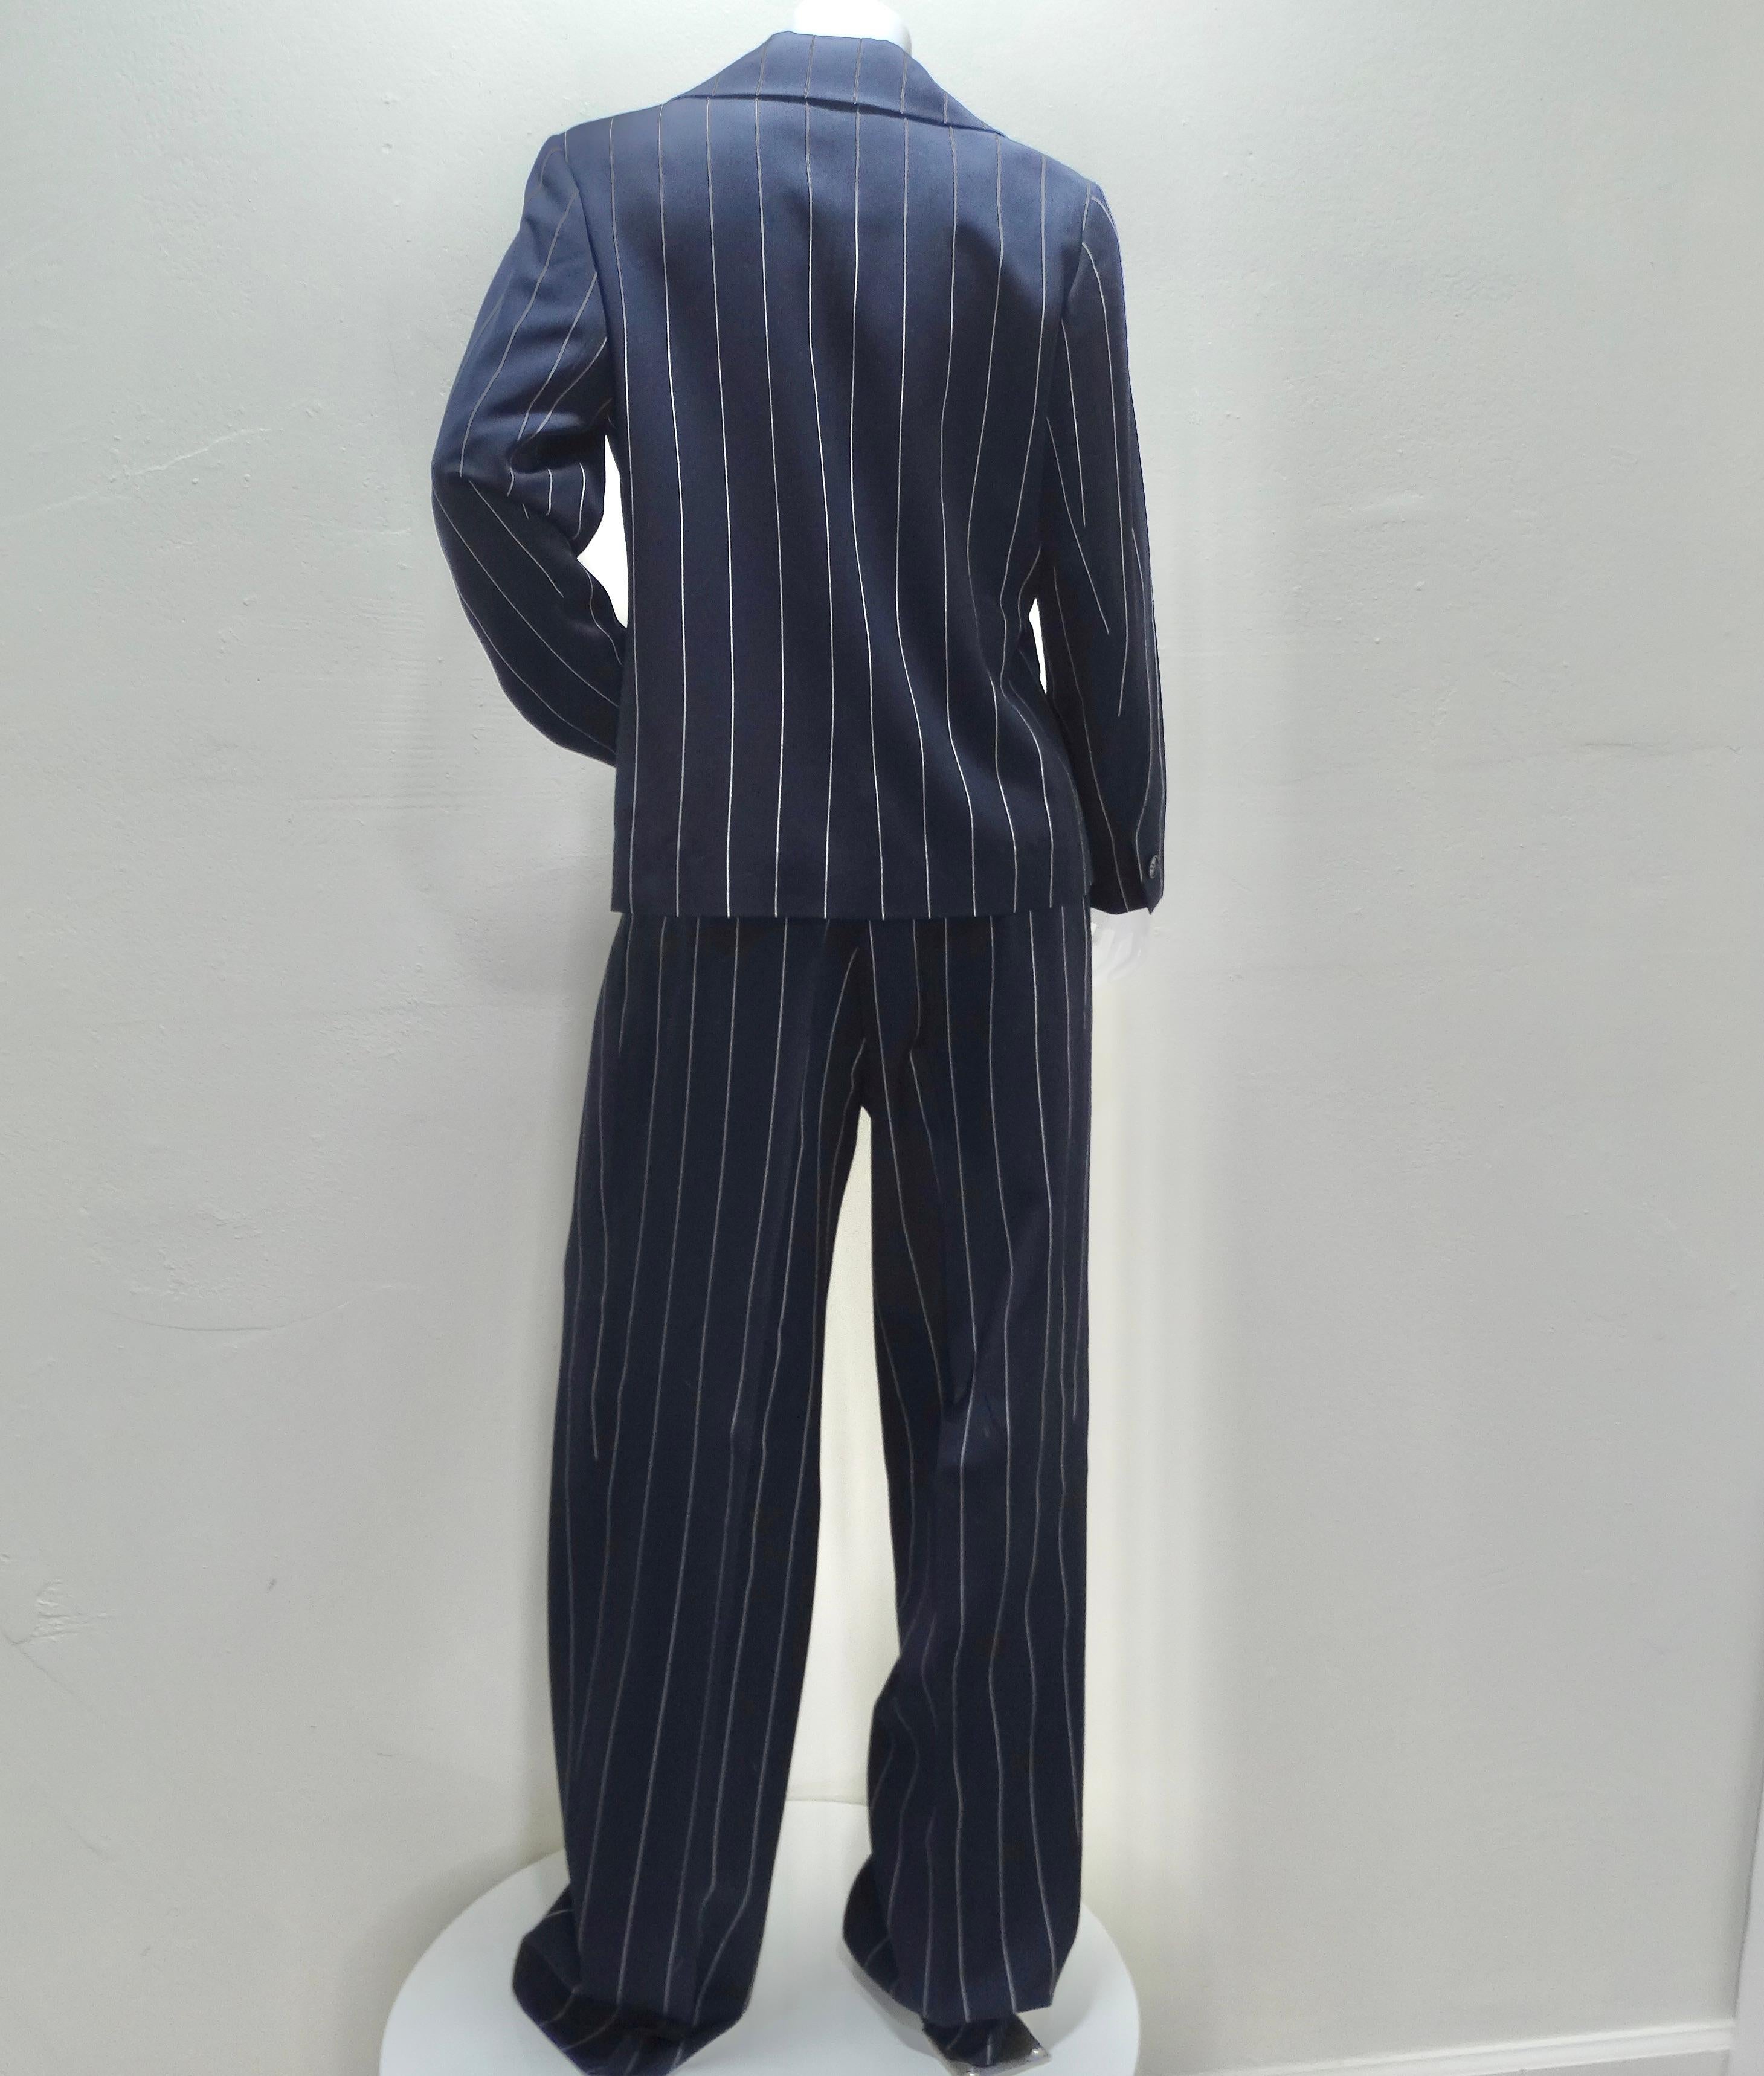 Christian Dior 1990s Navy Pinstripe Suit For Sale 9